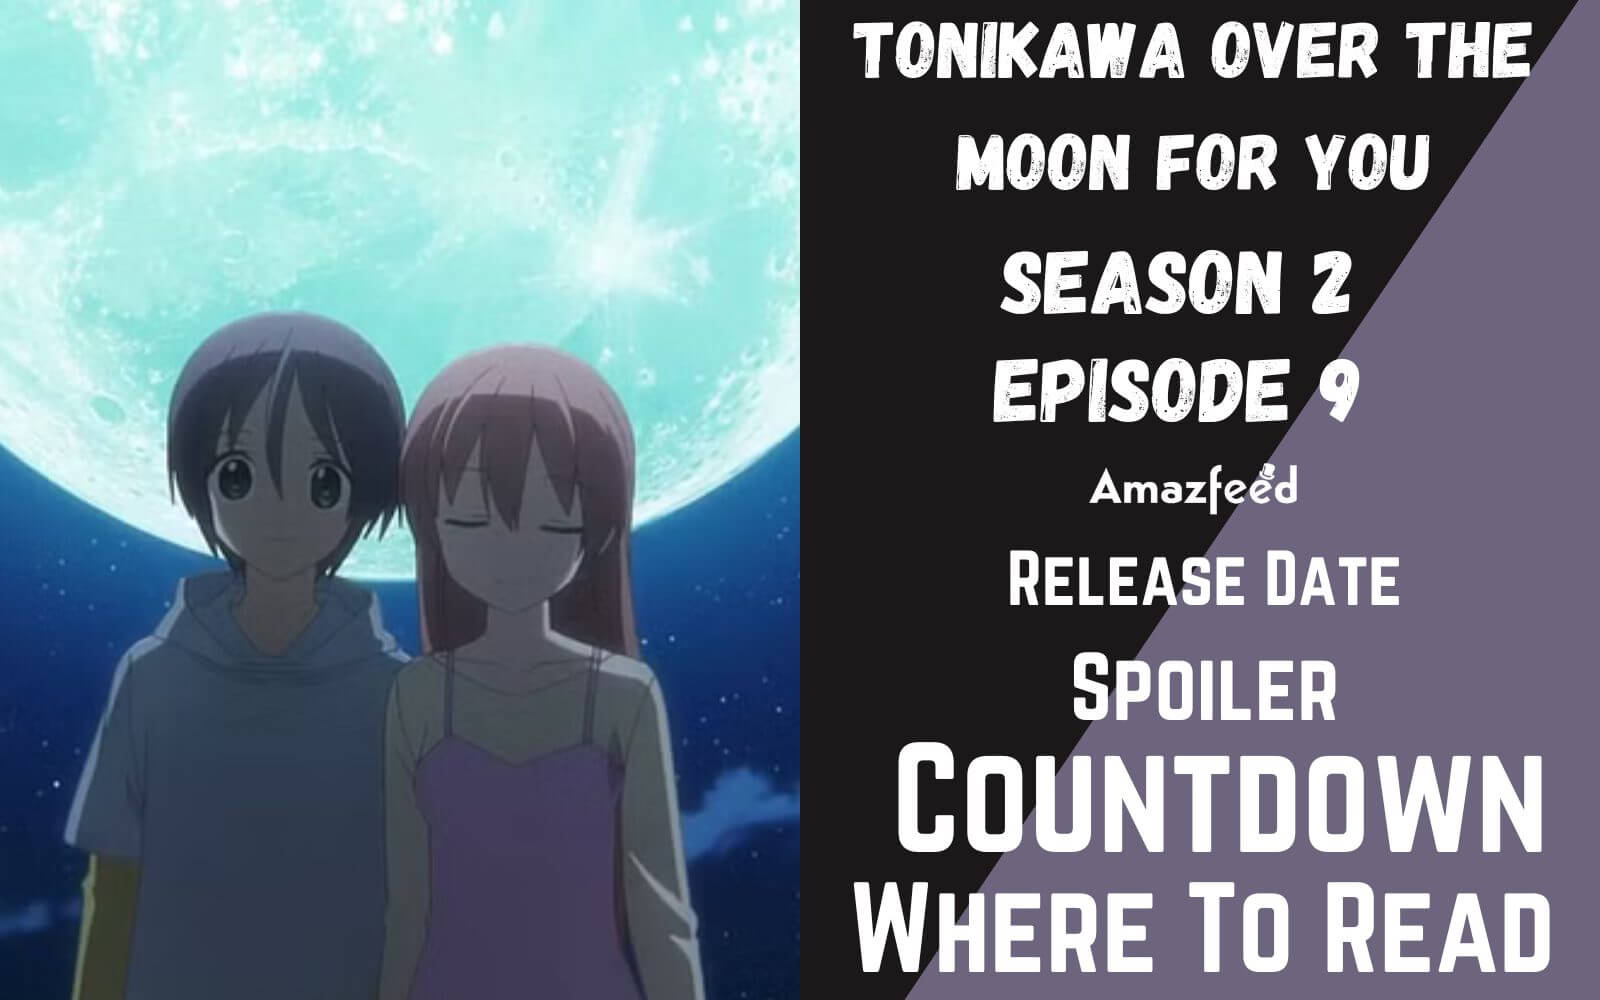 Tonikawa: Over The Moon For You season 2 episode 7 release date